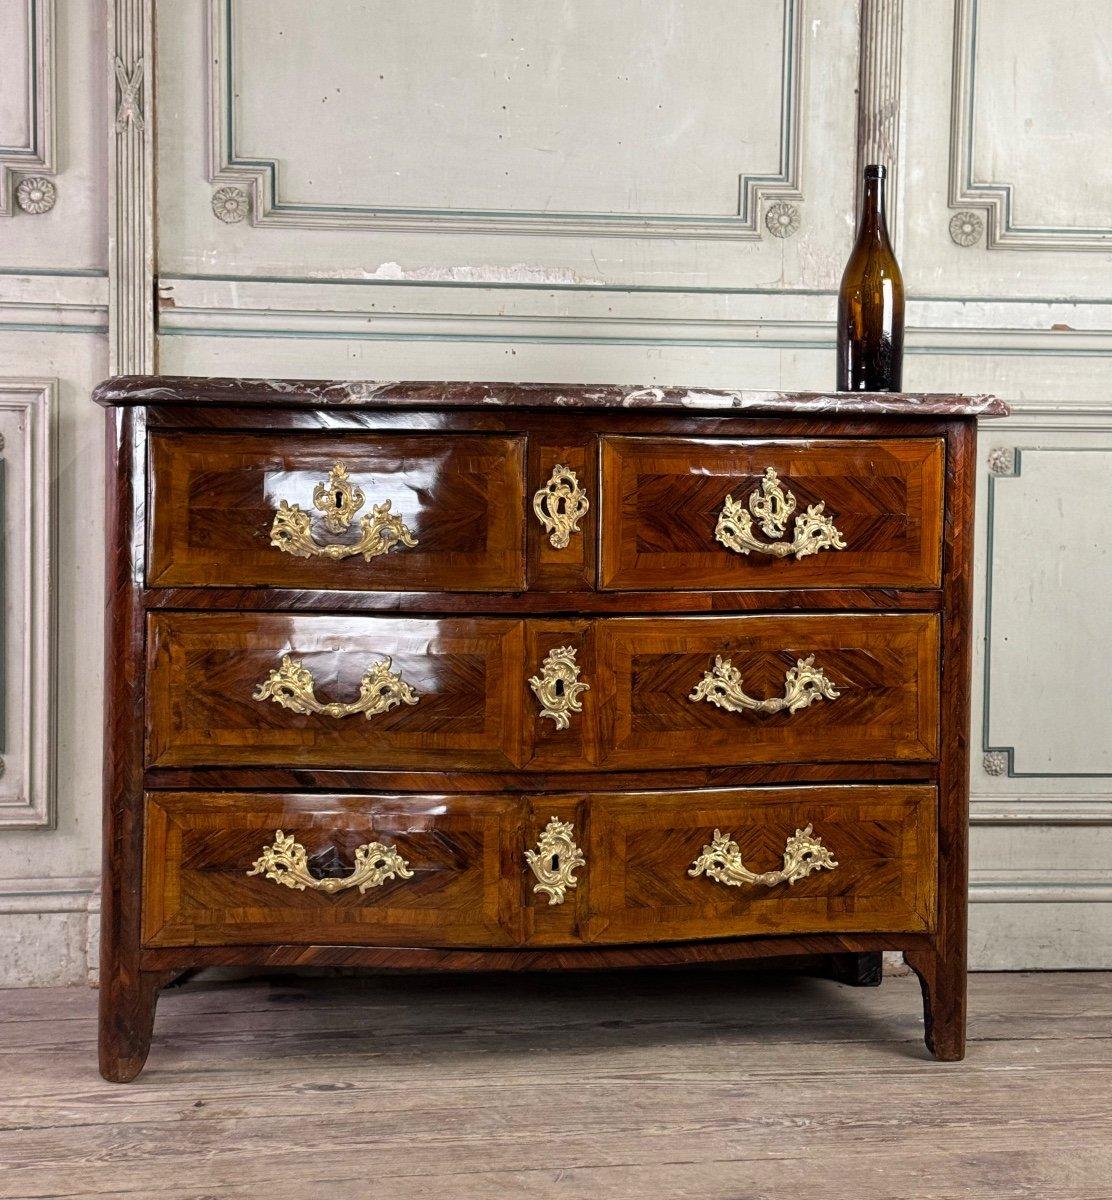 Louis XV Commode In Veneer And Gilded Bronzes, Rance Marble, 18th Century For Sale 3